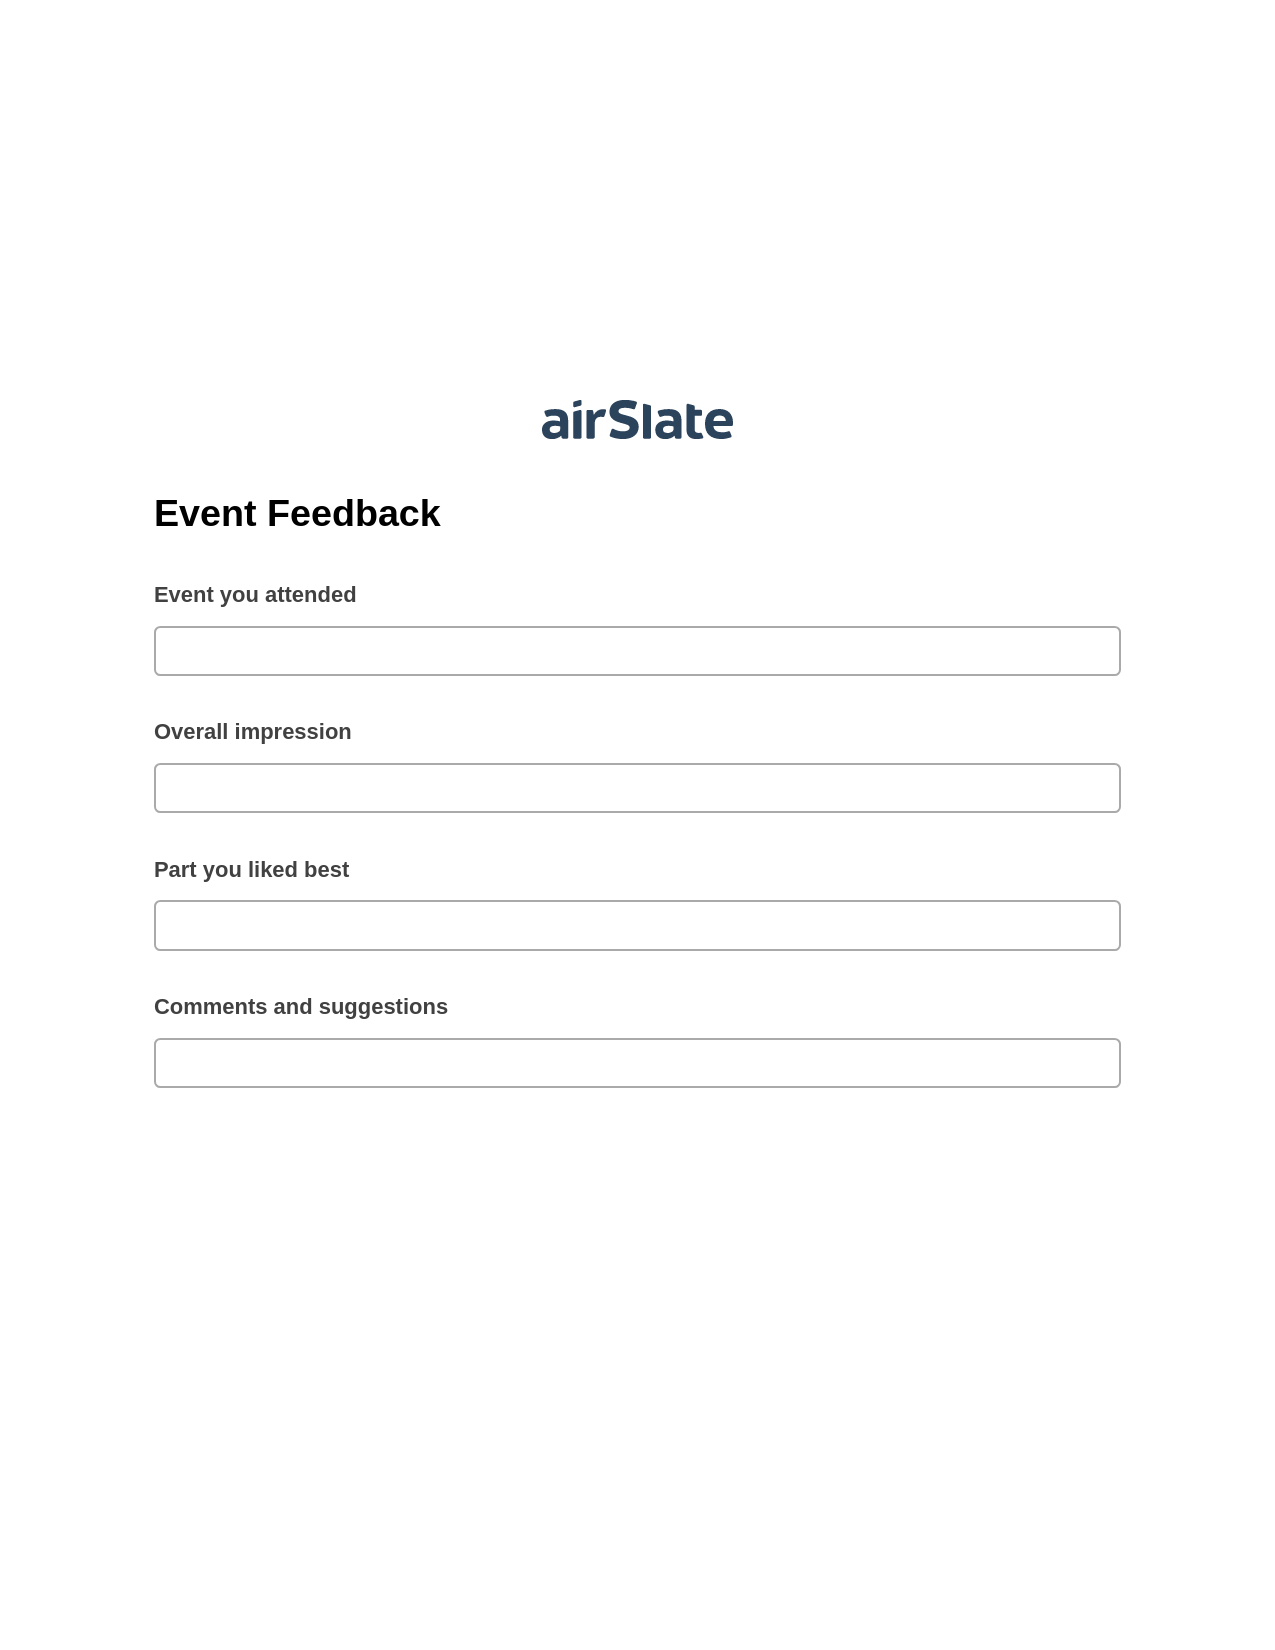 Event Feedback Pre-fill from Salesforce Record Bot, Update MS Dynamics 365 Records Bot, OneDrive Bot